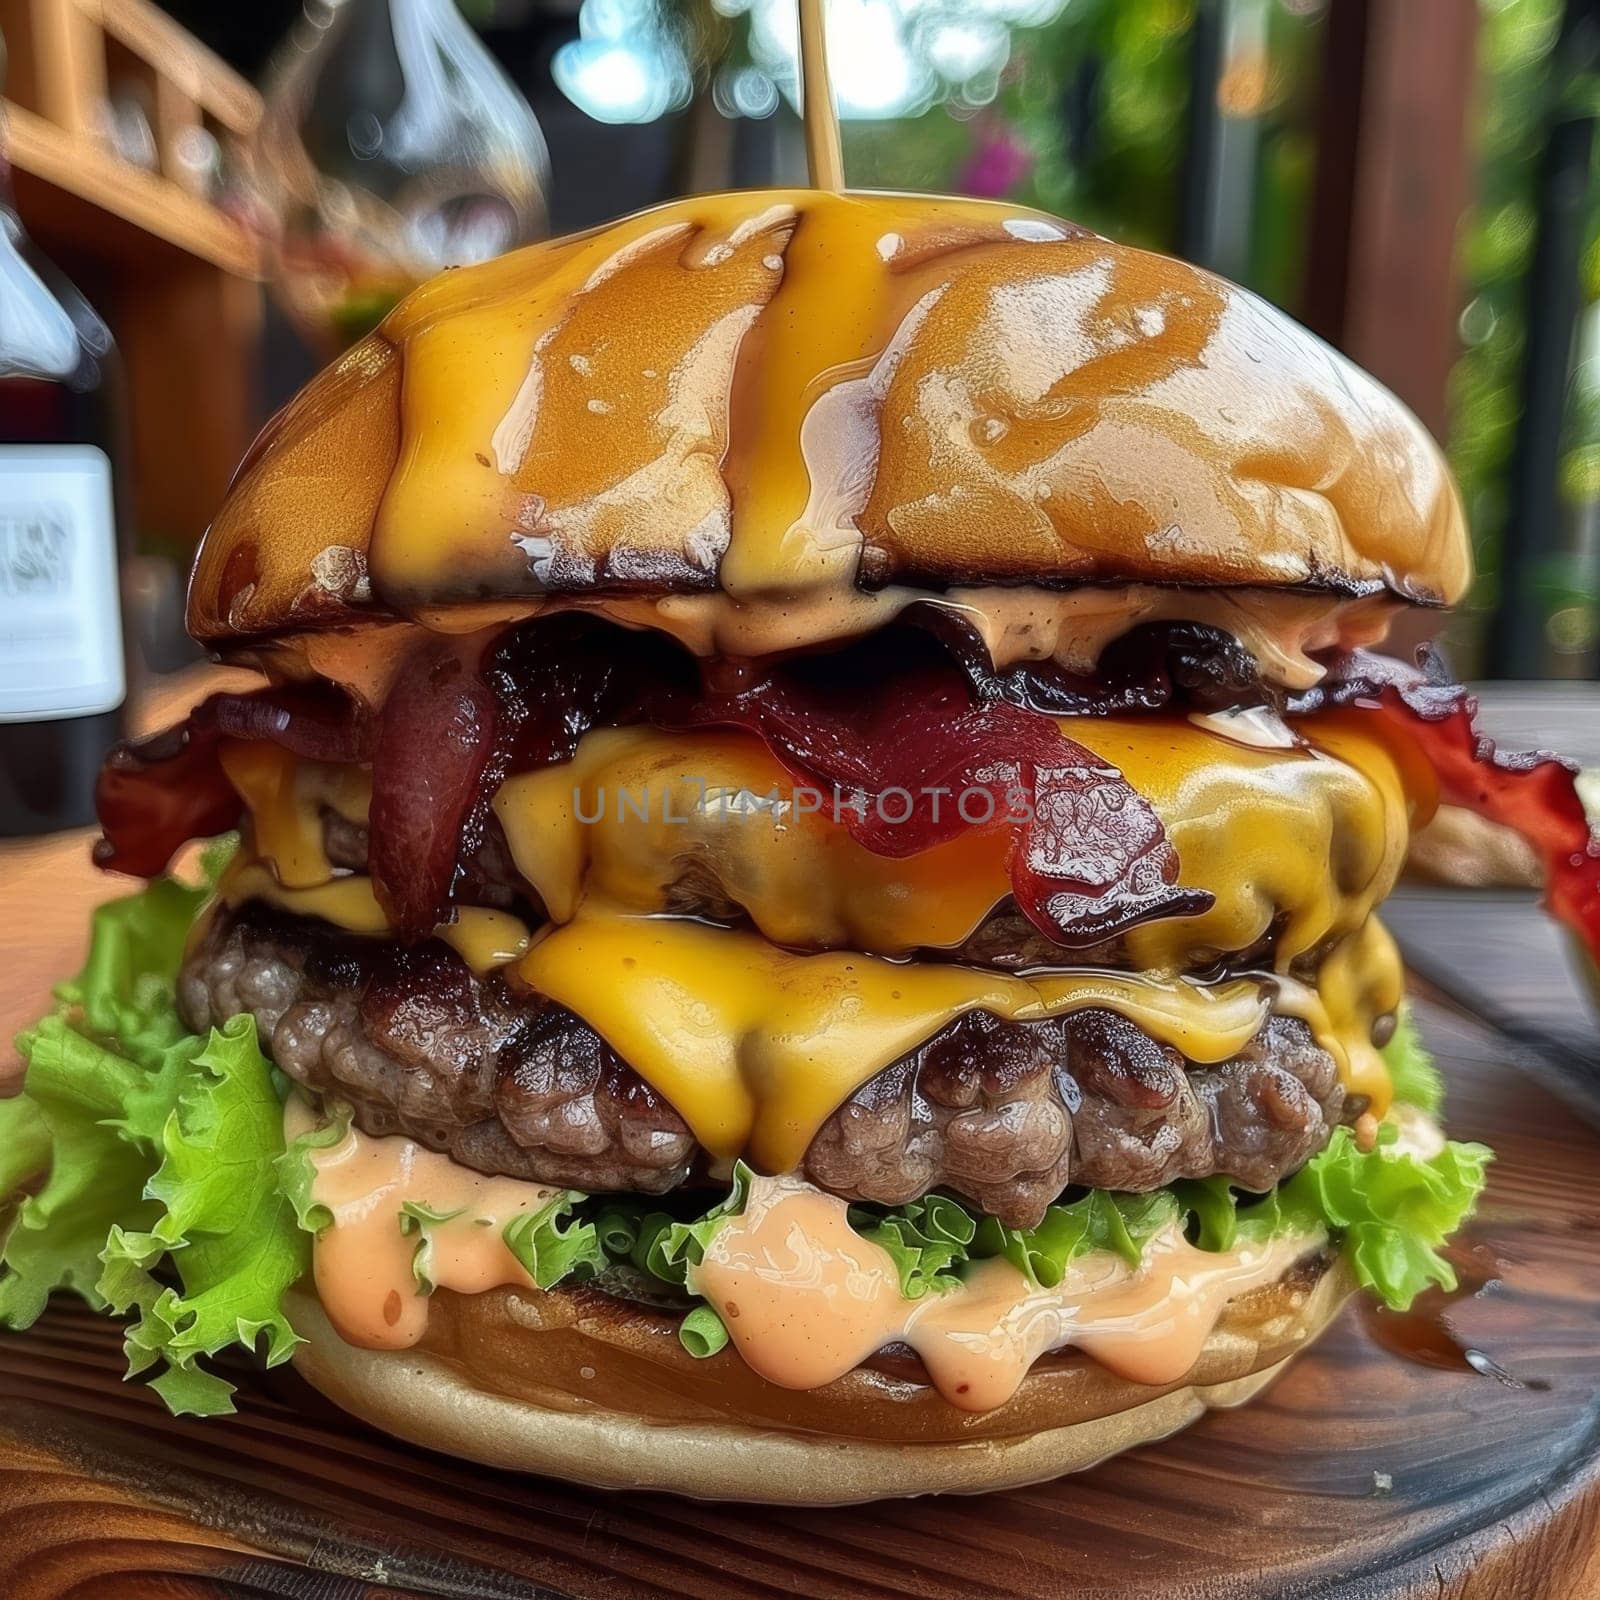 Juicy double cheeseburger with lettuce, tomato, and special sauce